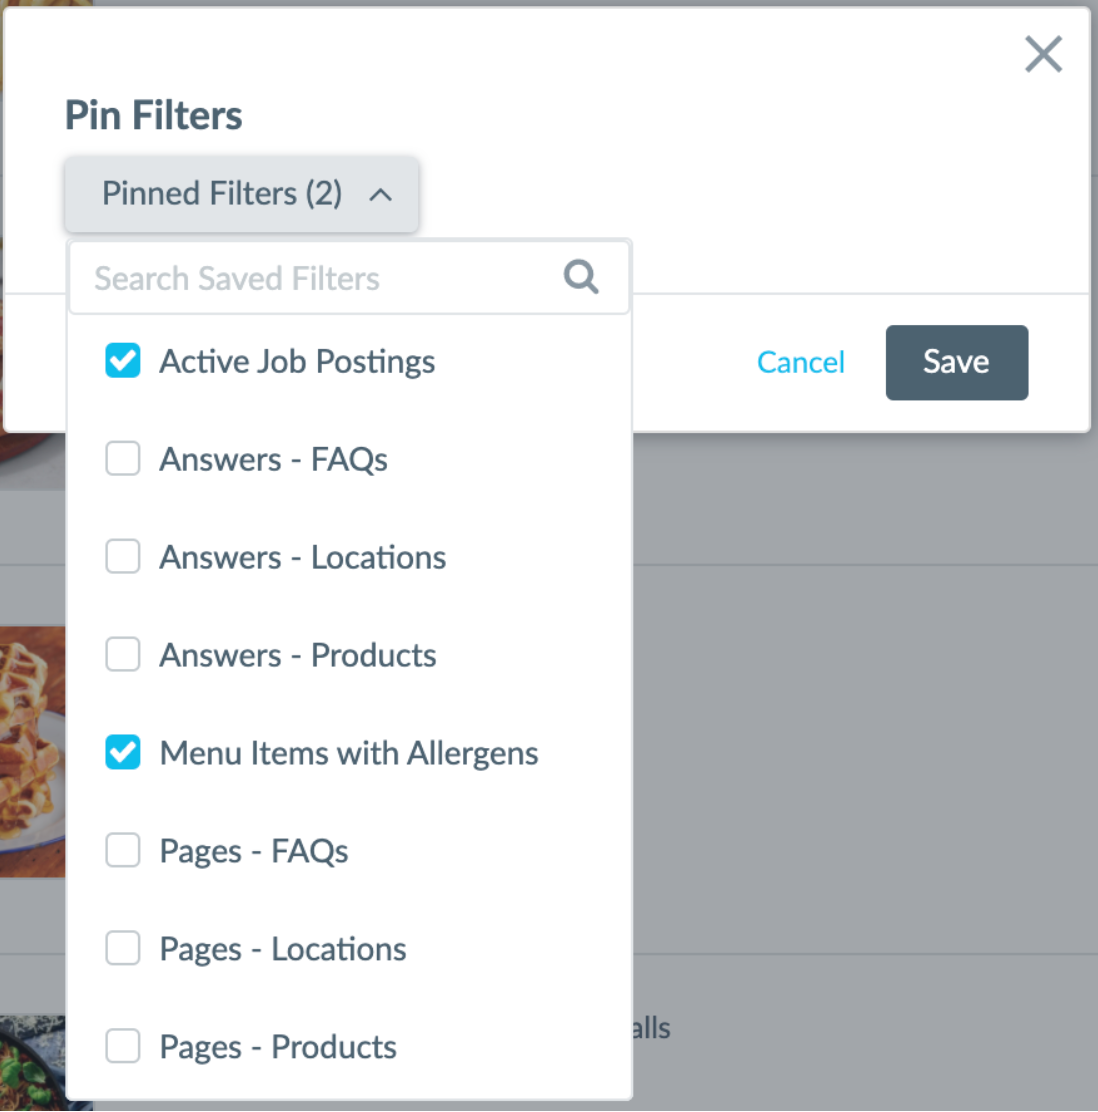 Select Pinned Filters